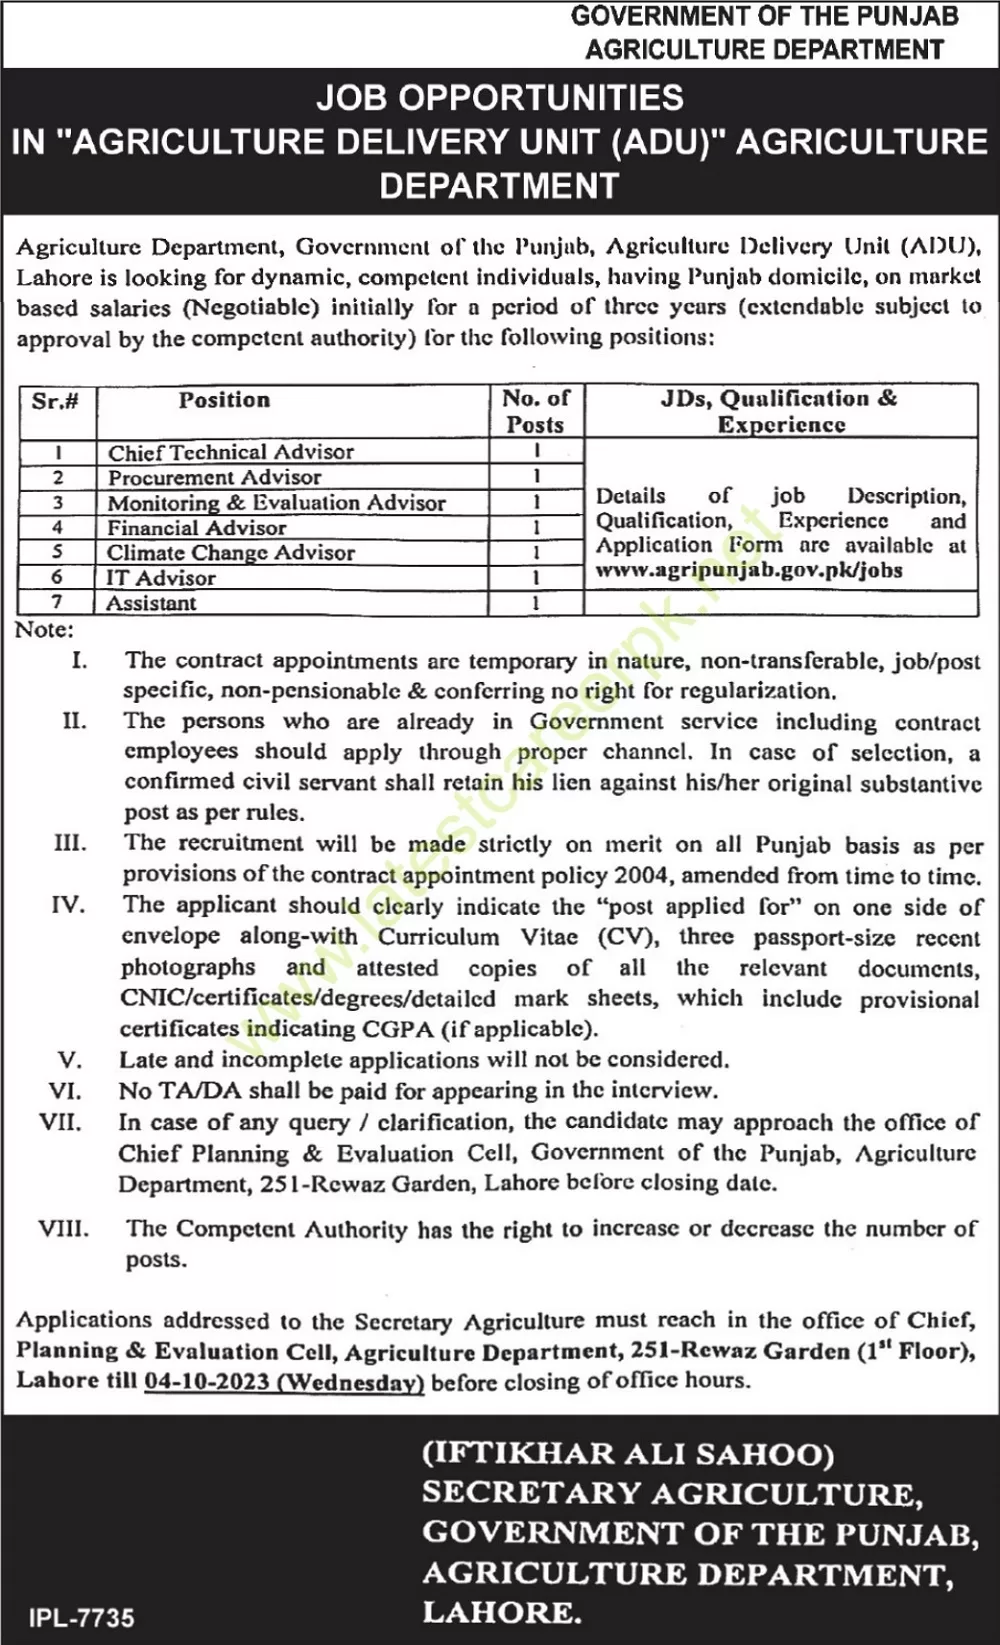 Government-of-Punjab-Agriculture-Department-Lahore-Jobs-20-Sep-2023